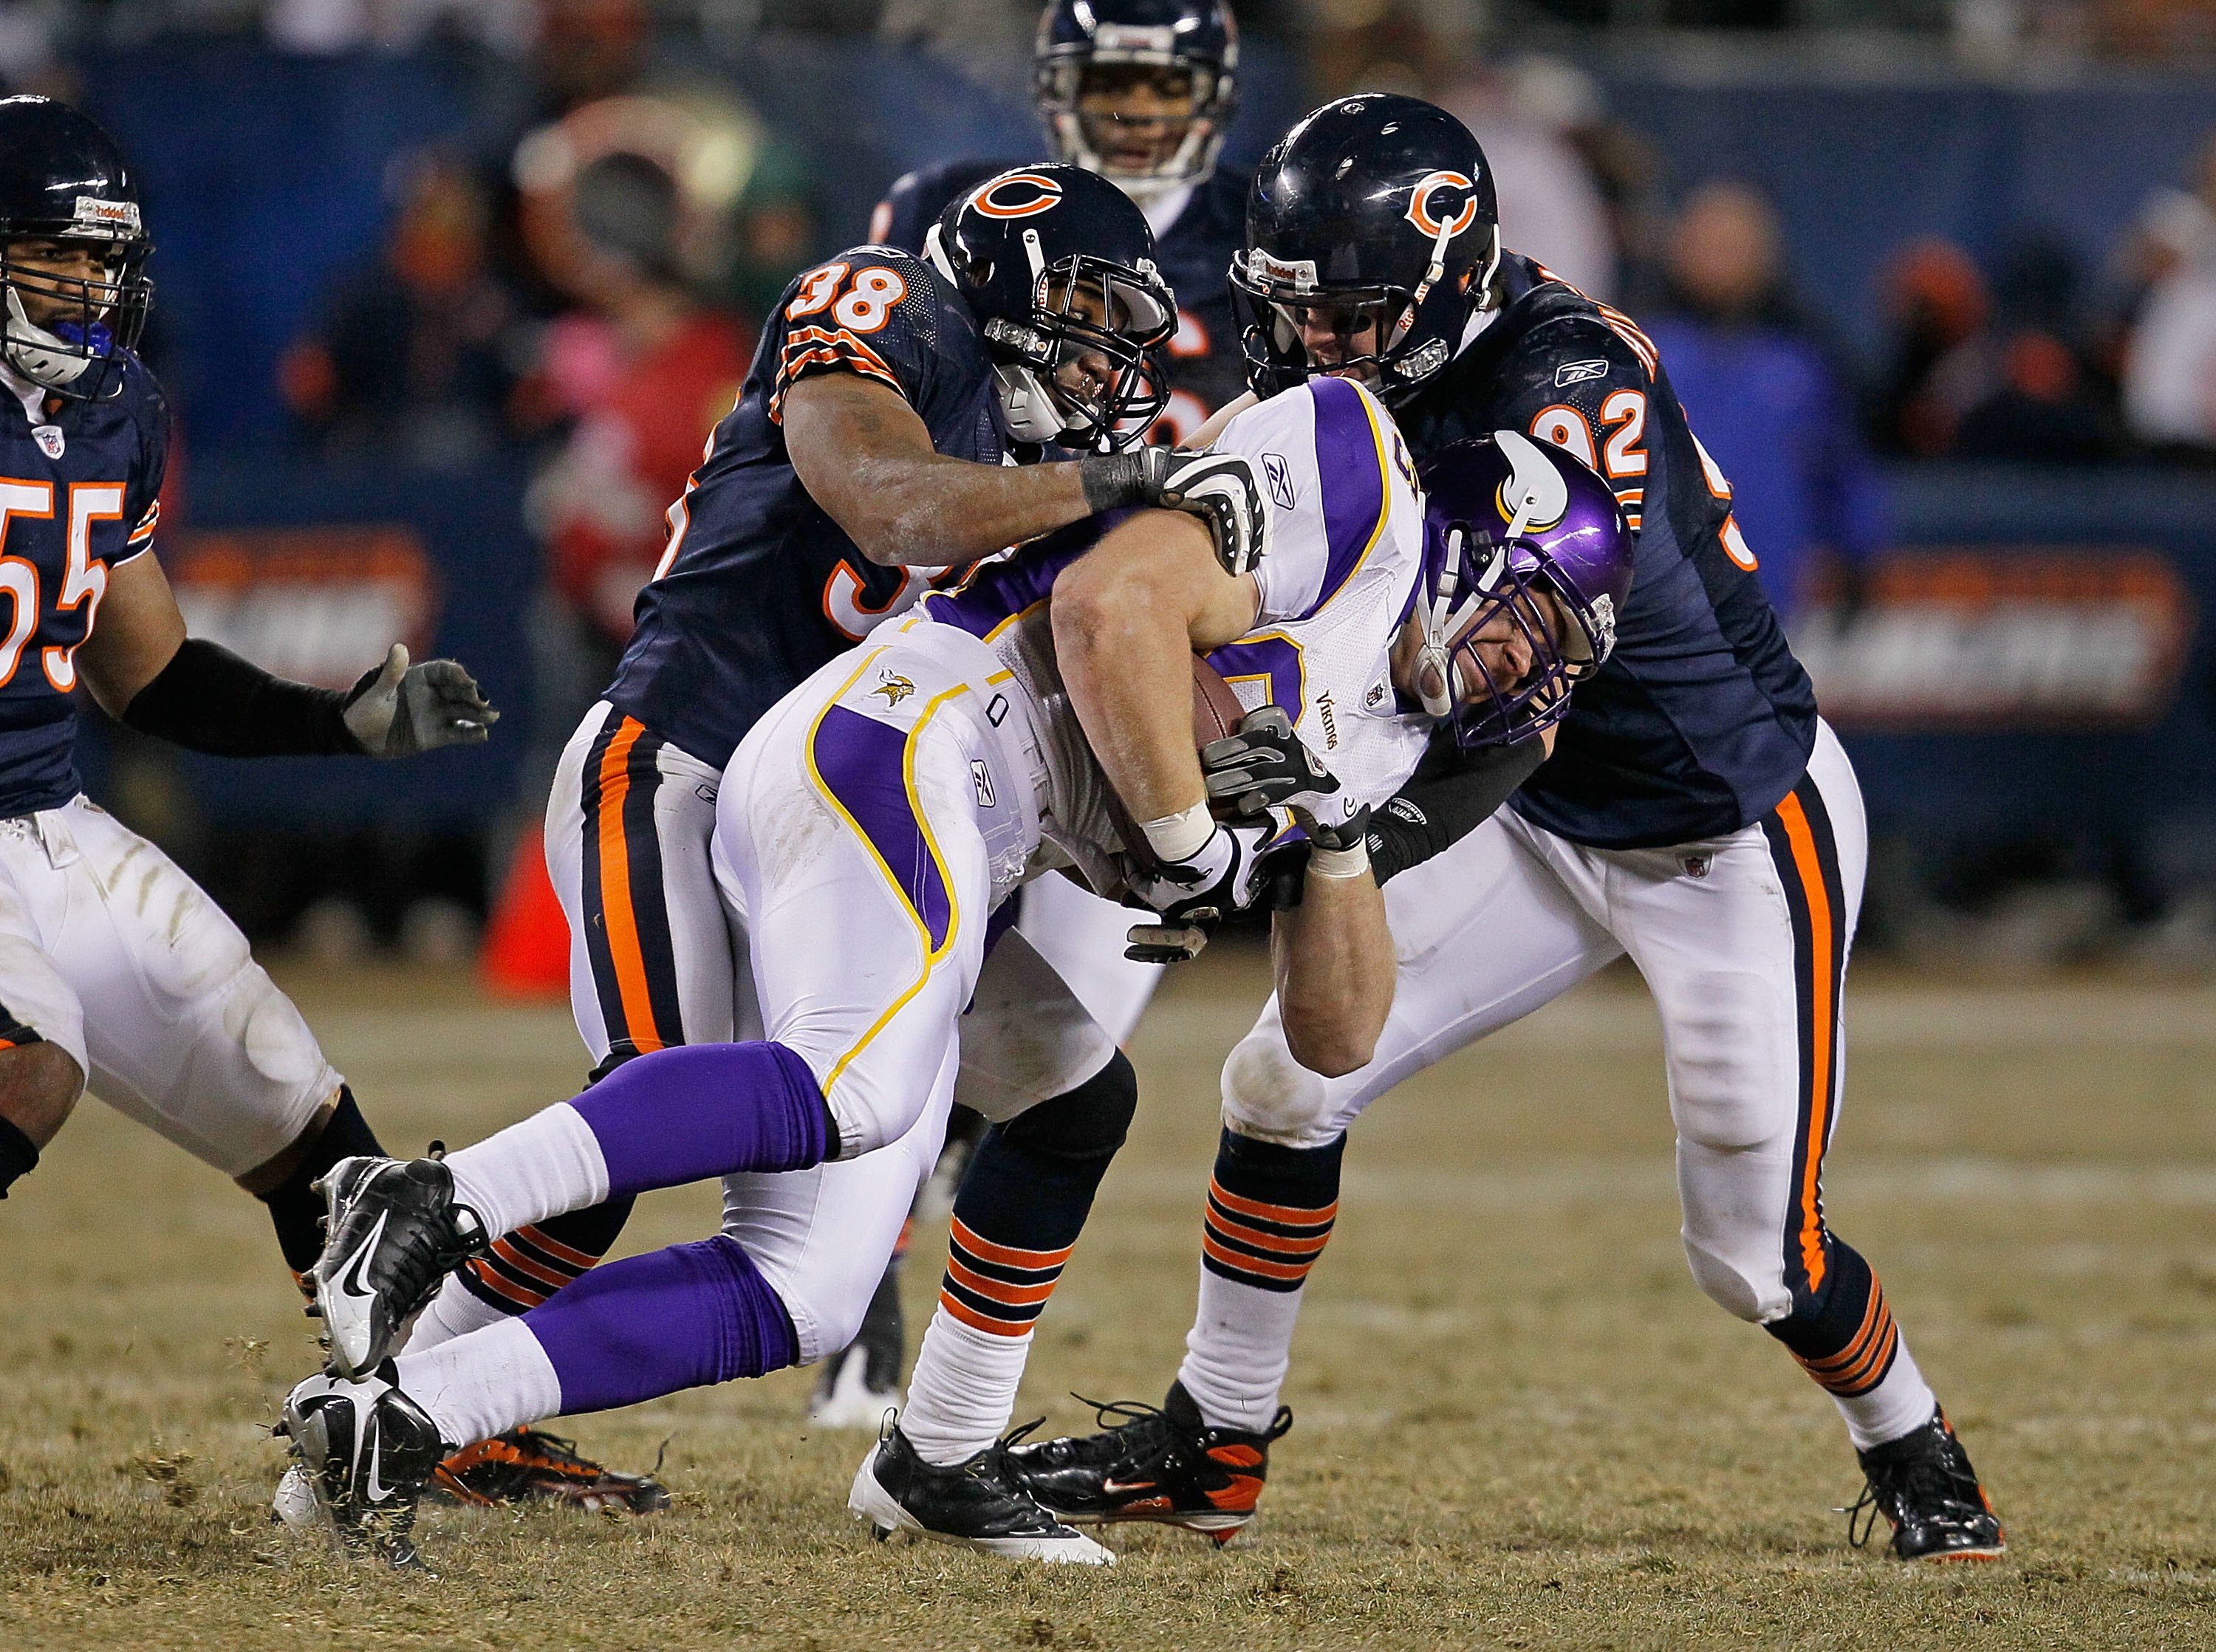 CHICAGO - DECEMBER 28: Jeff Dugan #83 of the Minnesota Vikings is brought down by Danieal Manning #38 and Hunter Hillenmeyer #92 of the Chicago Bears as teammate Lance Briggs #55 moves in at Soldier Field on December 28, 2009 in Chicago, Illinois. The Bea